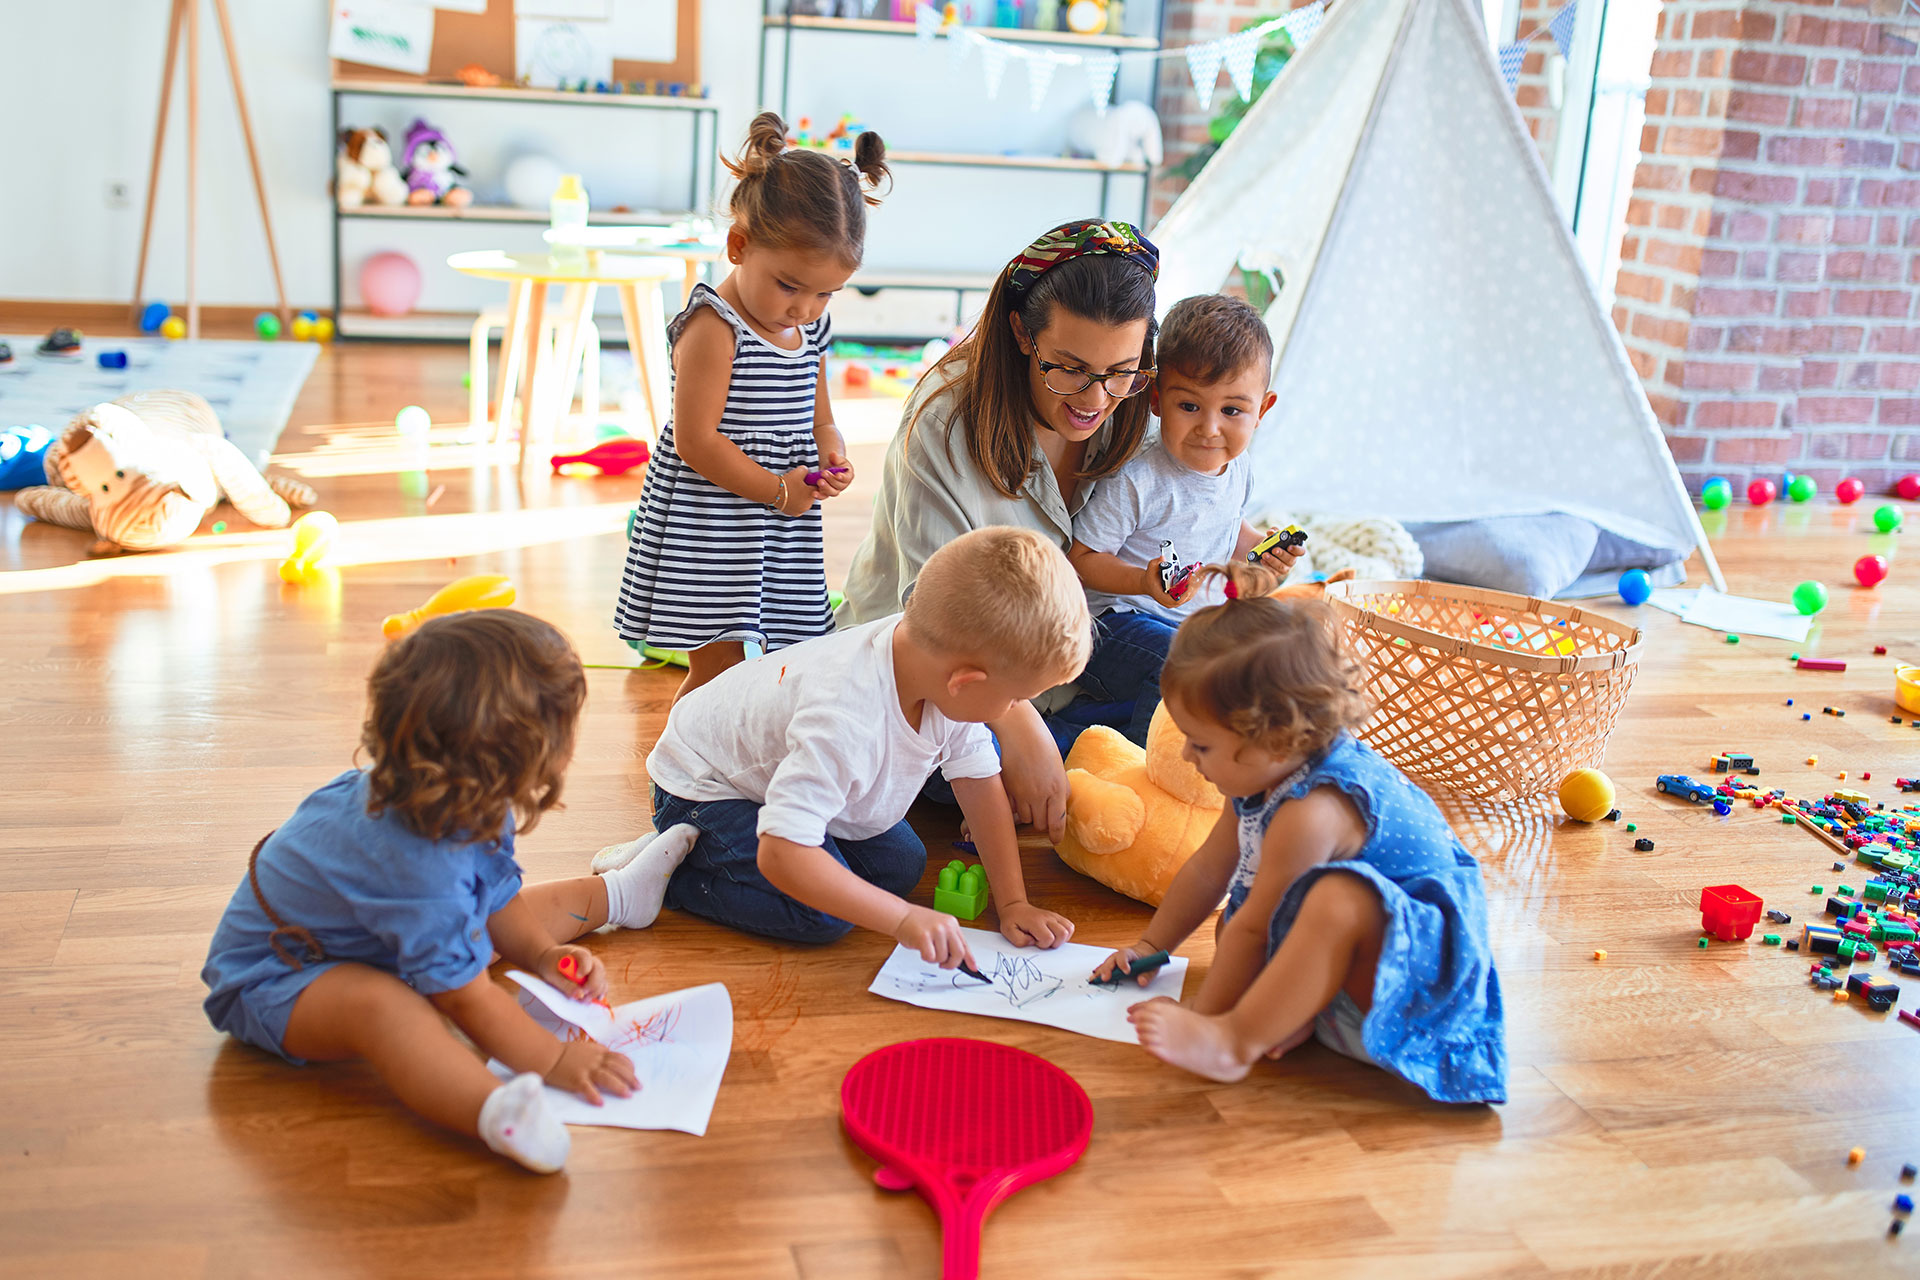 Teacher and group of toddlers sitting on the floor drawing using paper and pencil around lots of toys at an in-home daycare.